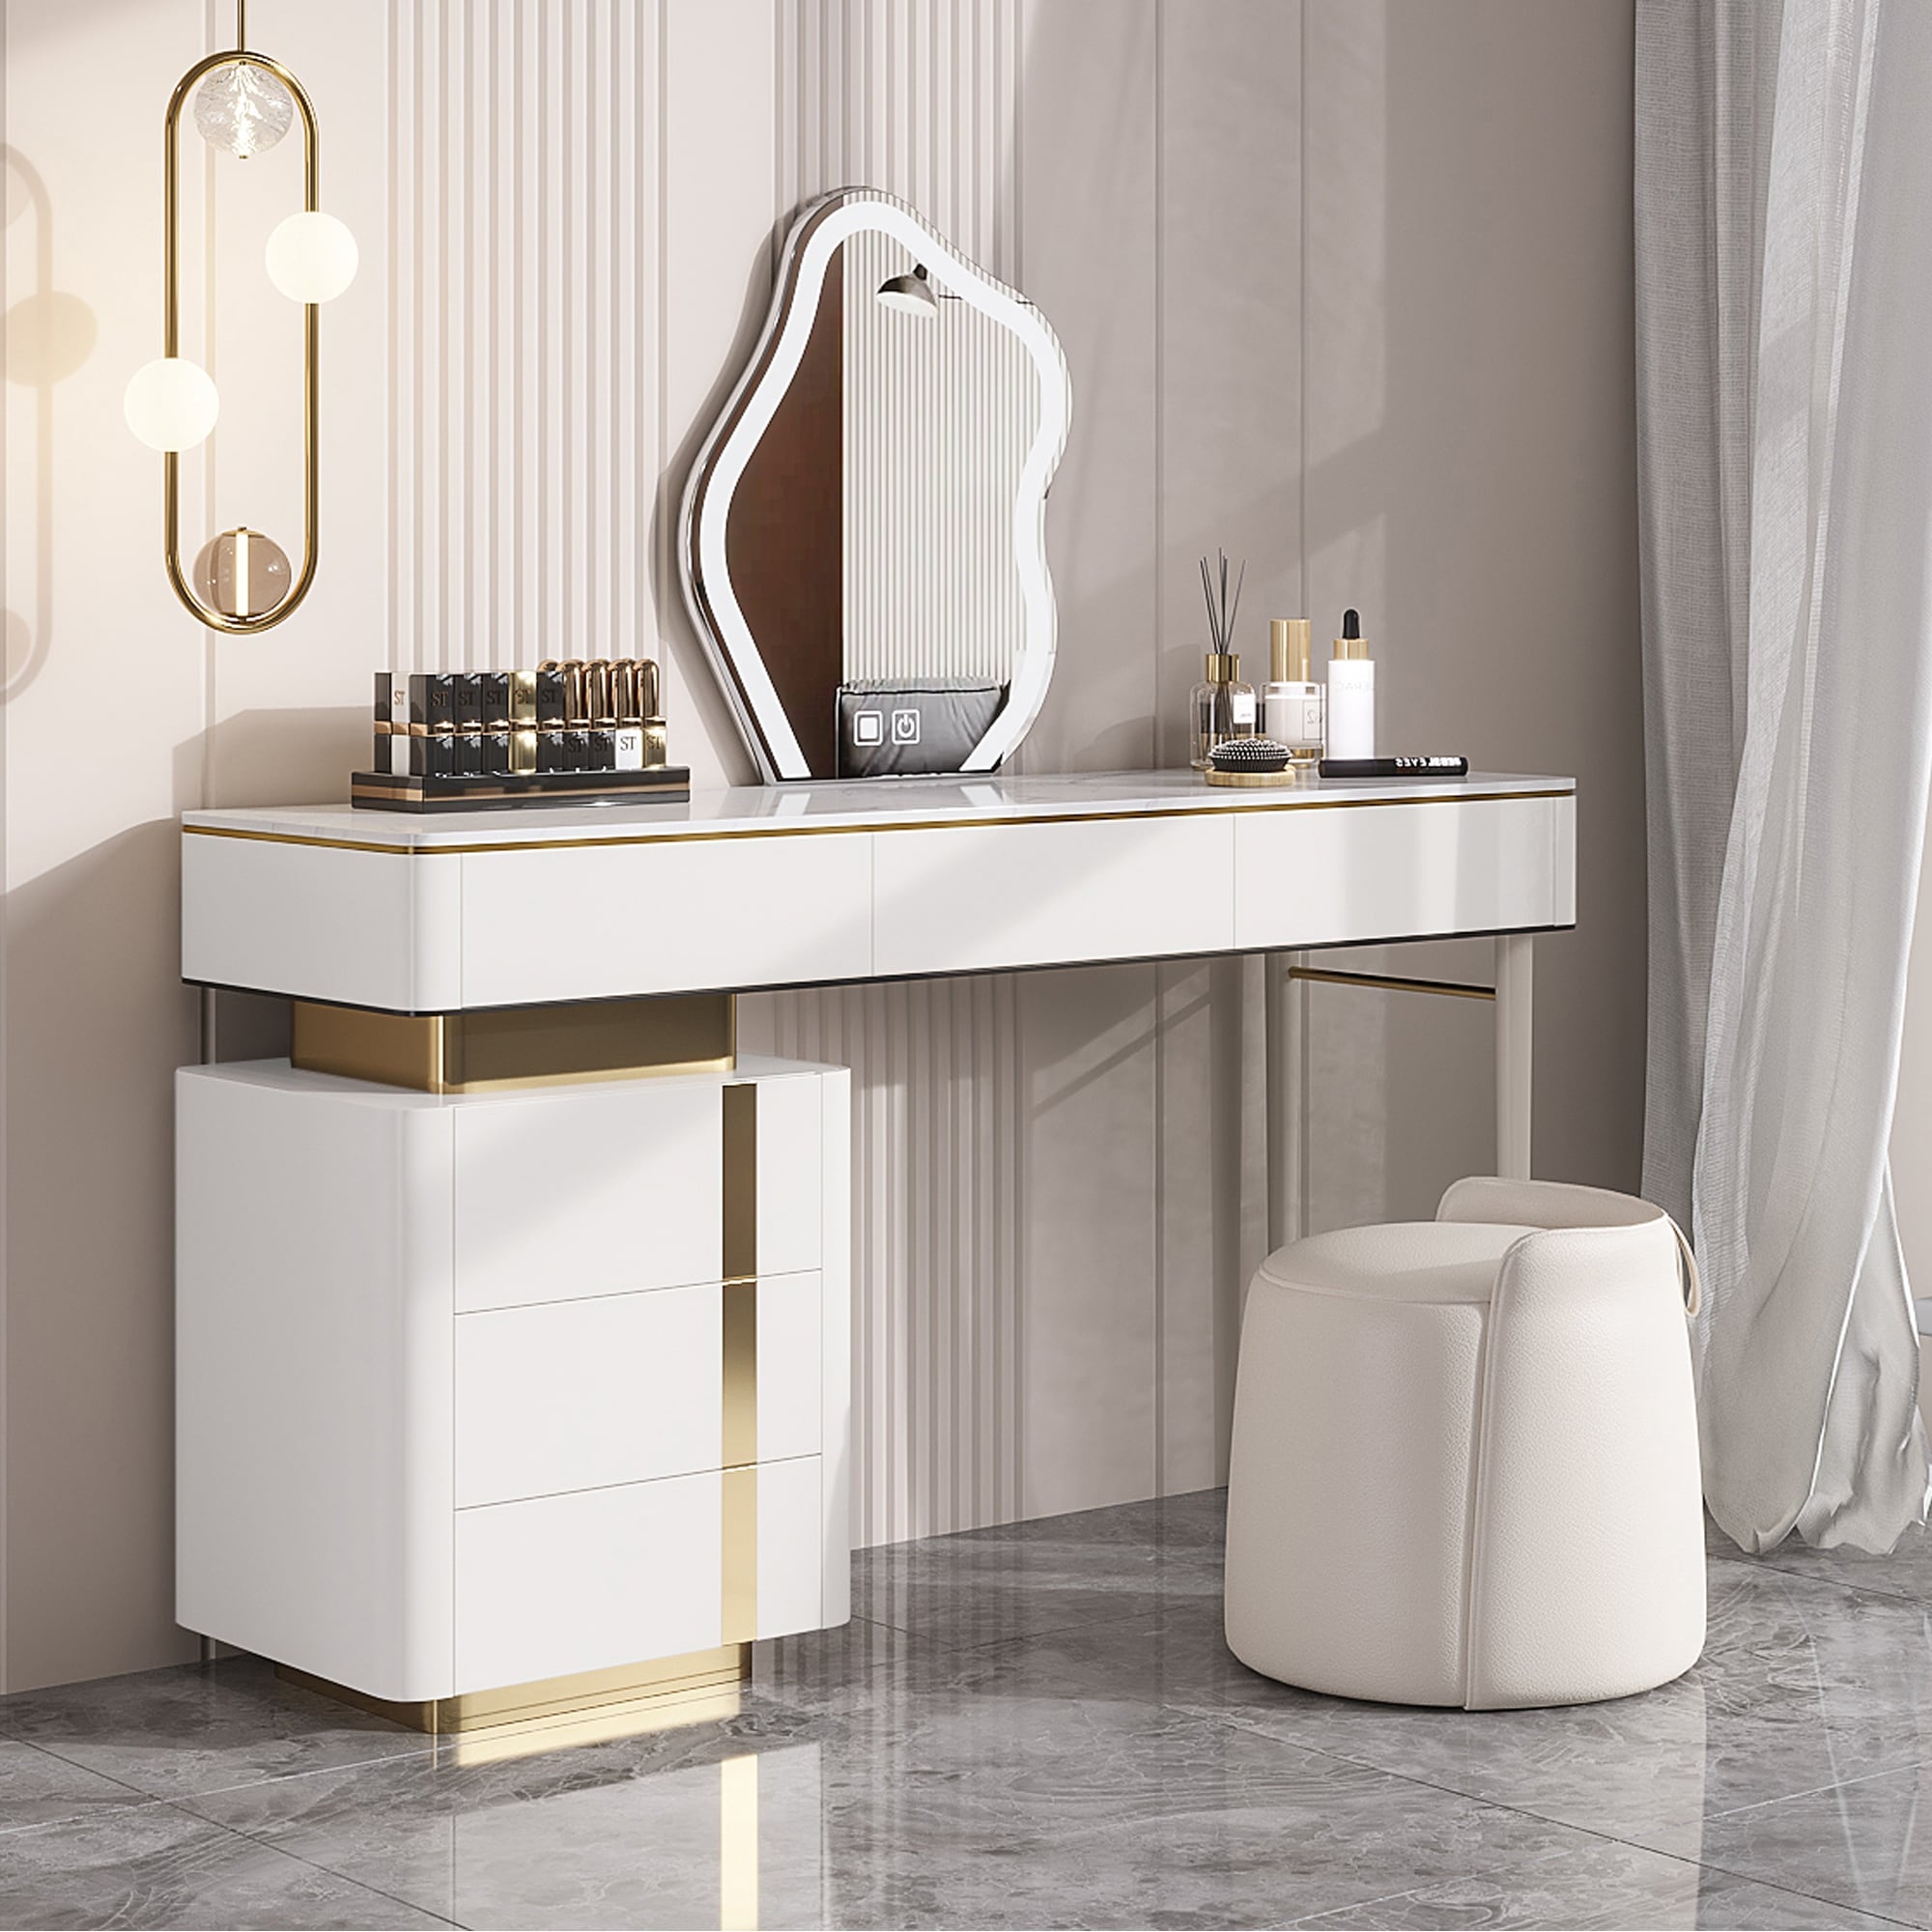 https://ak1.ostkcdn.com/images/products/is/images/direct/1fe0c62a4a823f13438b13d9ce82653b484e4e3d/Vanity-Table-Set%2C-Lustrous-Marble-Top-Dressing-Table-with-Mirror.jpg